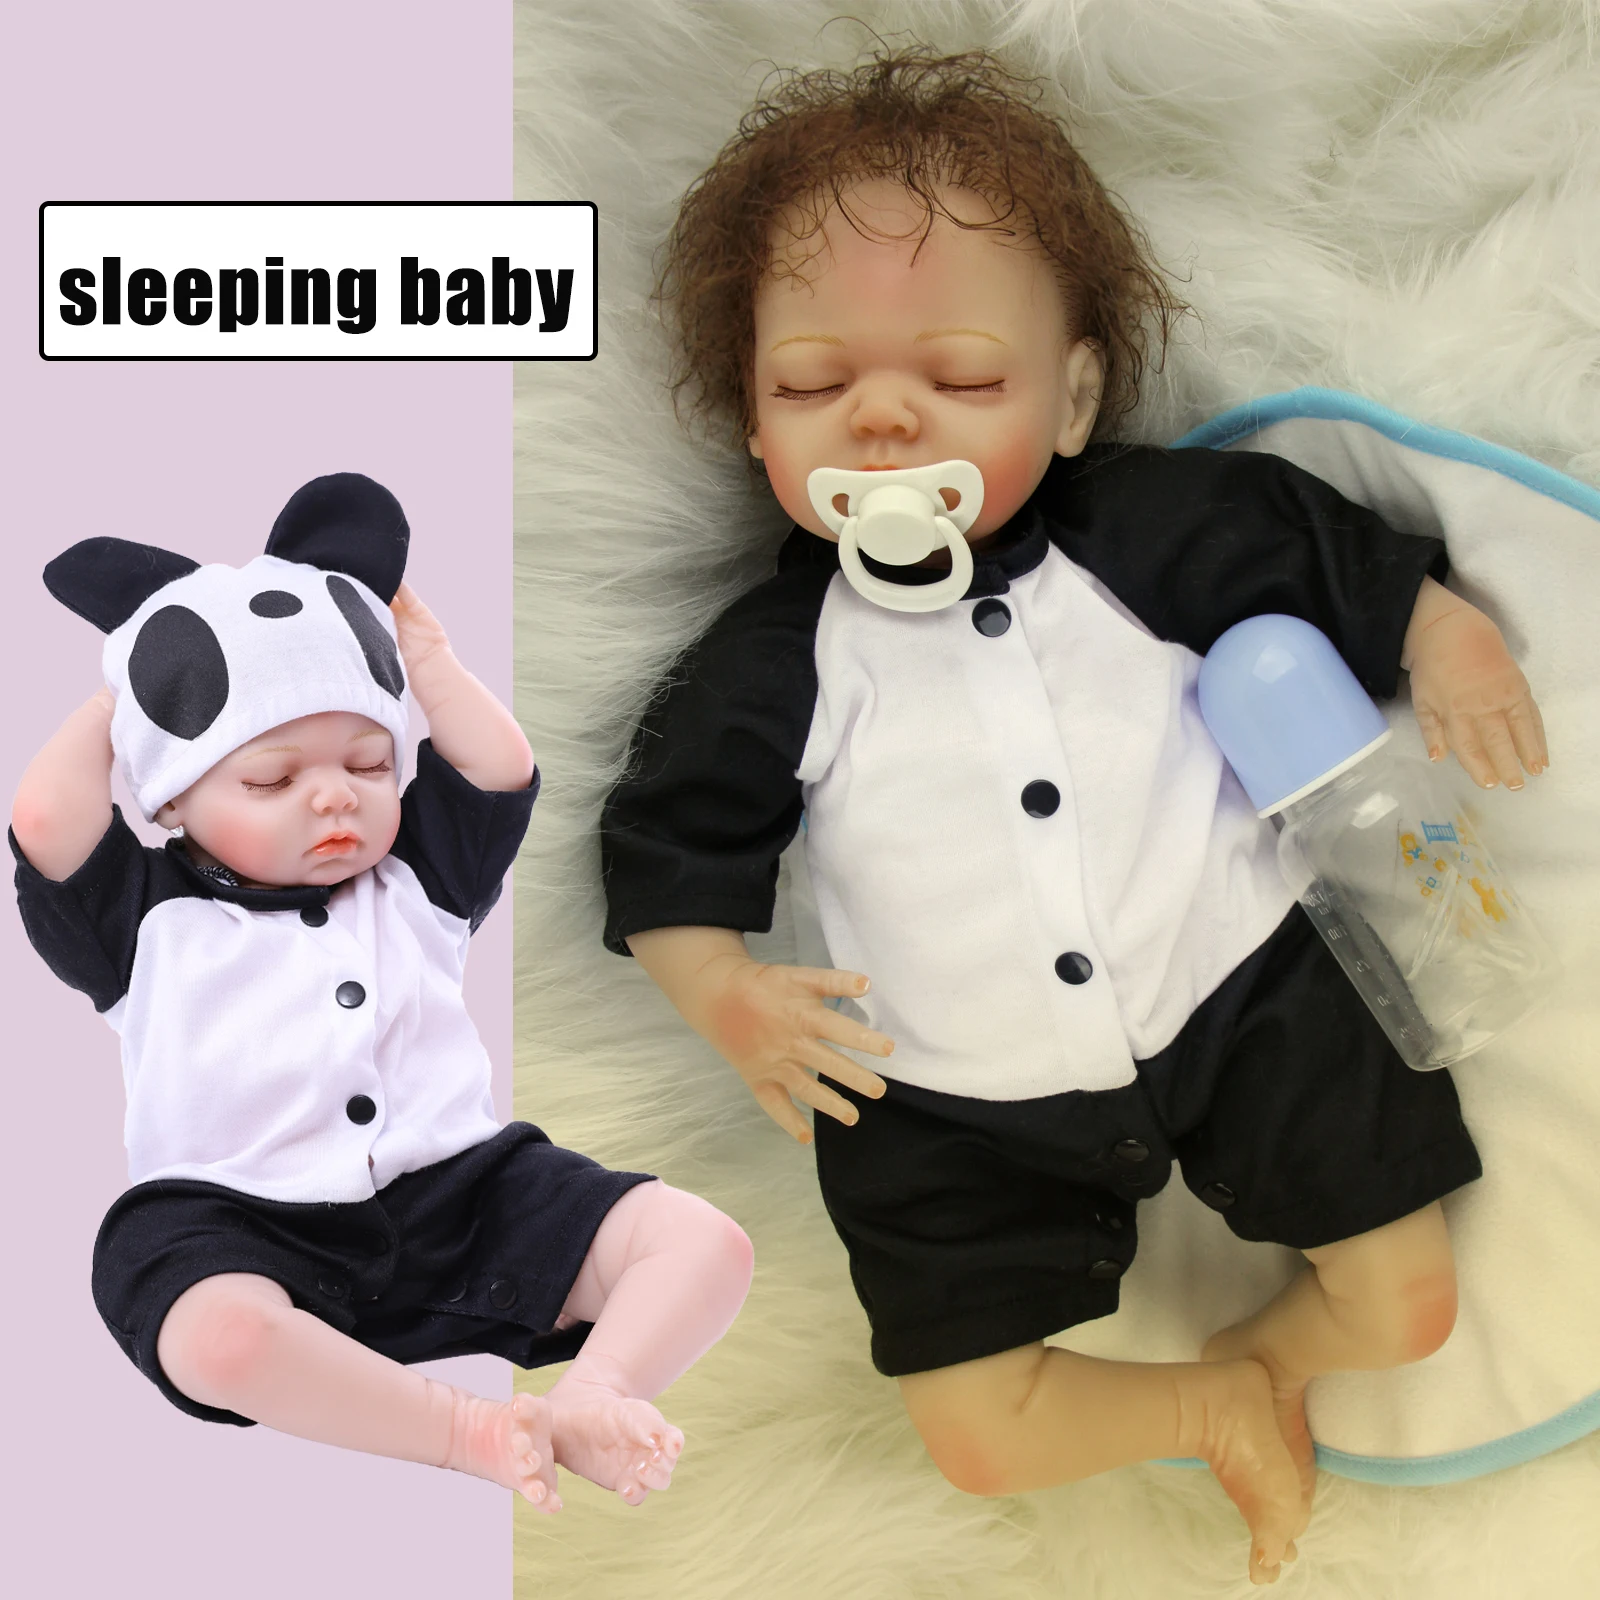 Realistic 45 Cm 22 Inch Reborn Doll Baby Silicone Vinyl Soft Cloth Body Boy Closed Eyes Super Baby Handmade Toy Holiday Gift super realistic stuffed animals multi colored sky overlord fire breathing dragons boy s favorite birthday gift